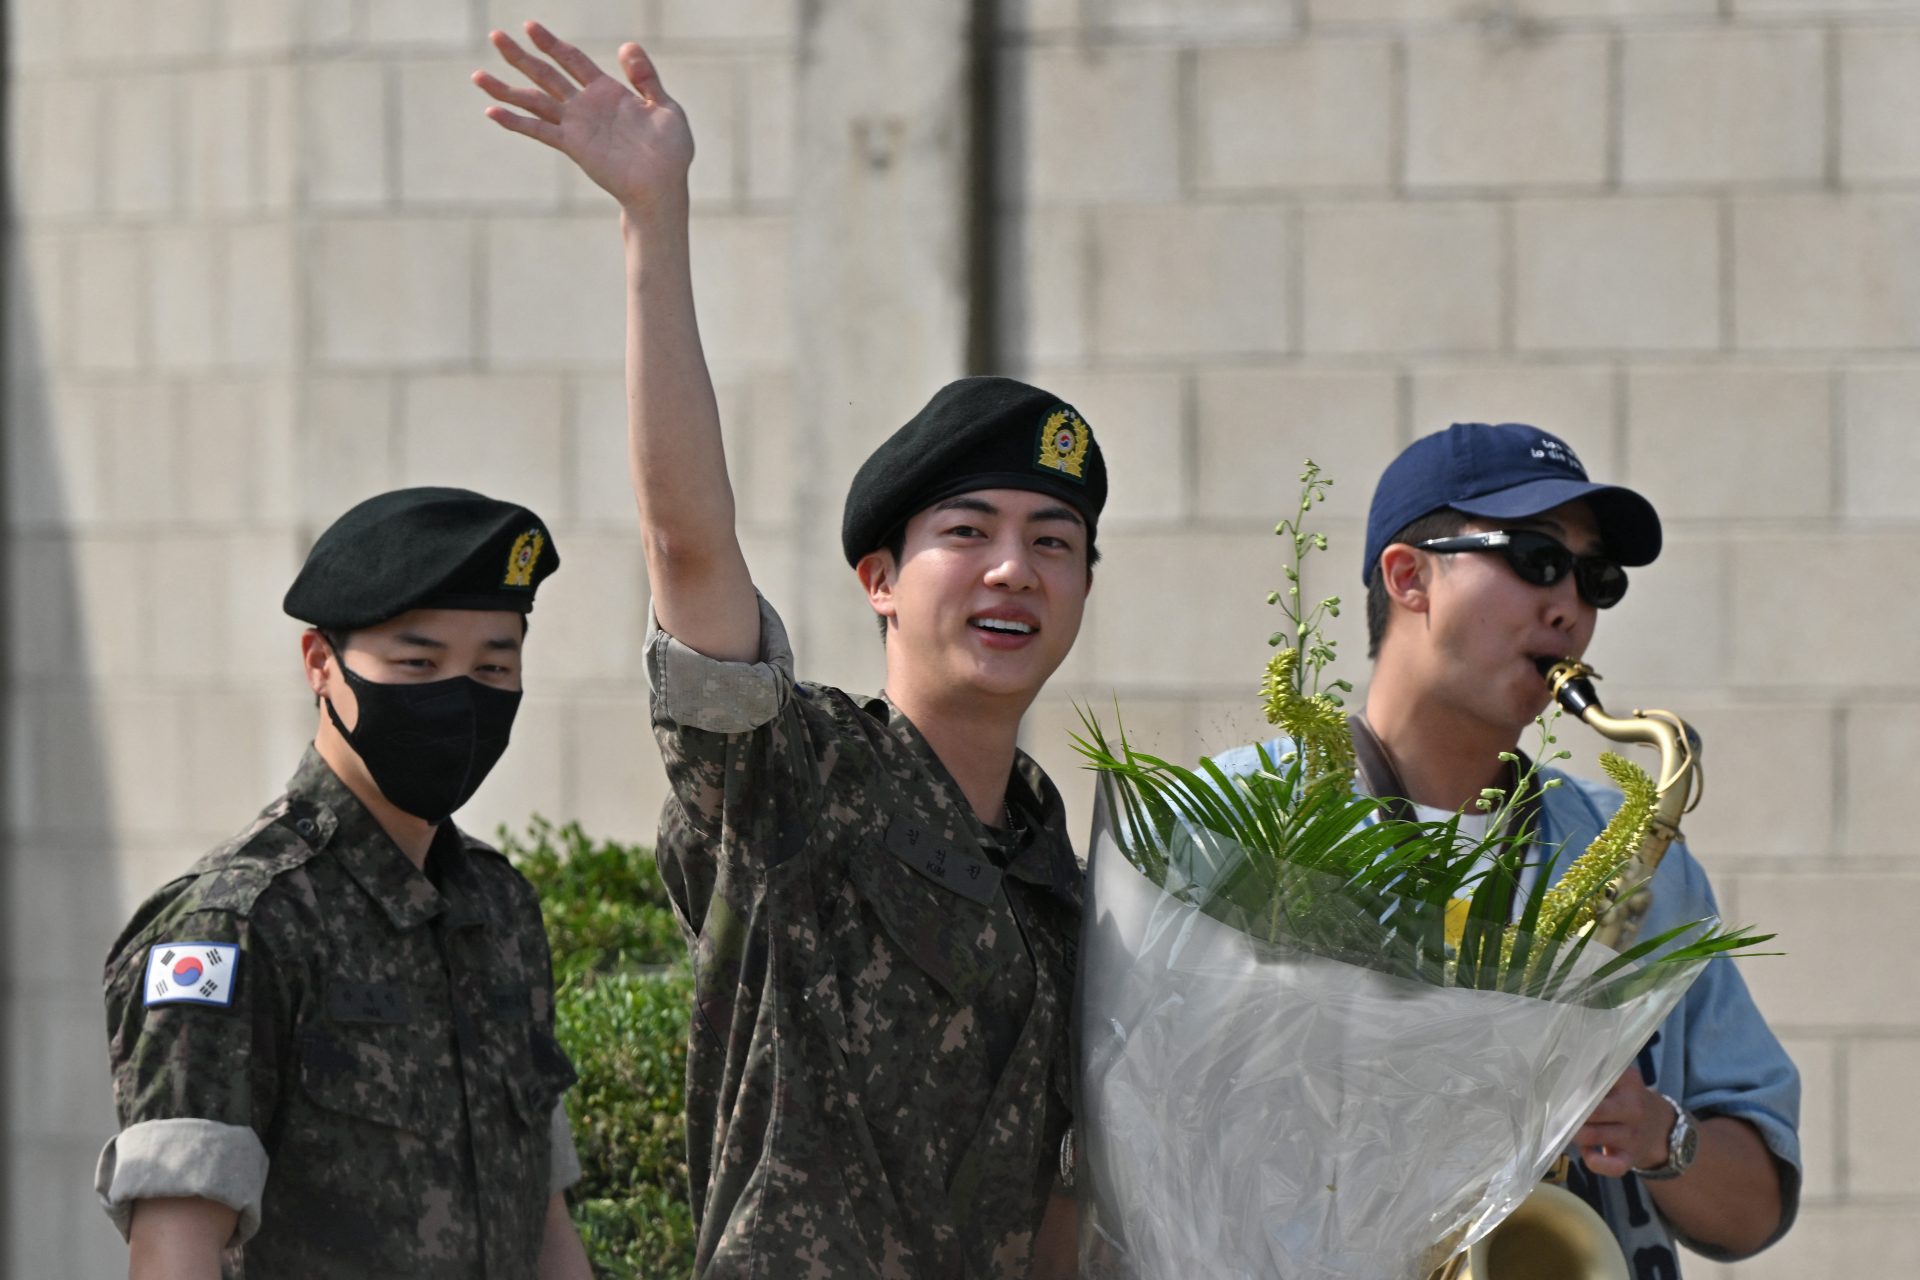 How BTS' Jin completed his military service